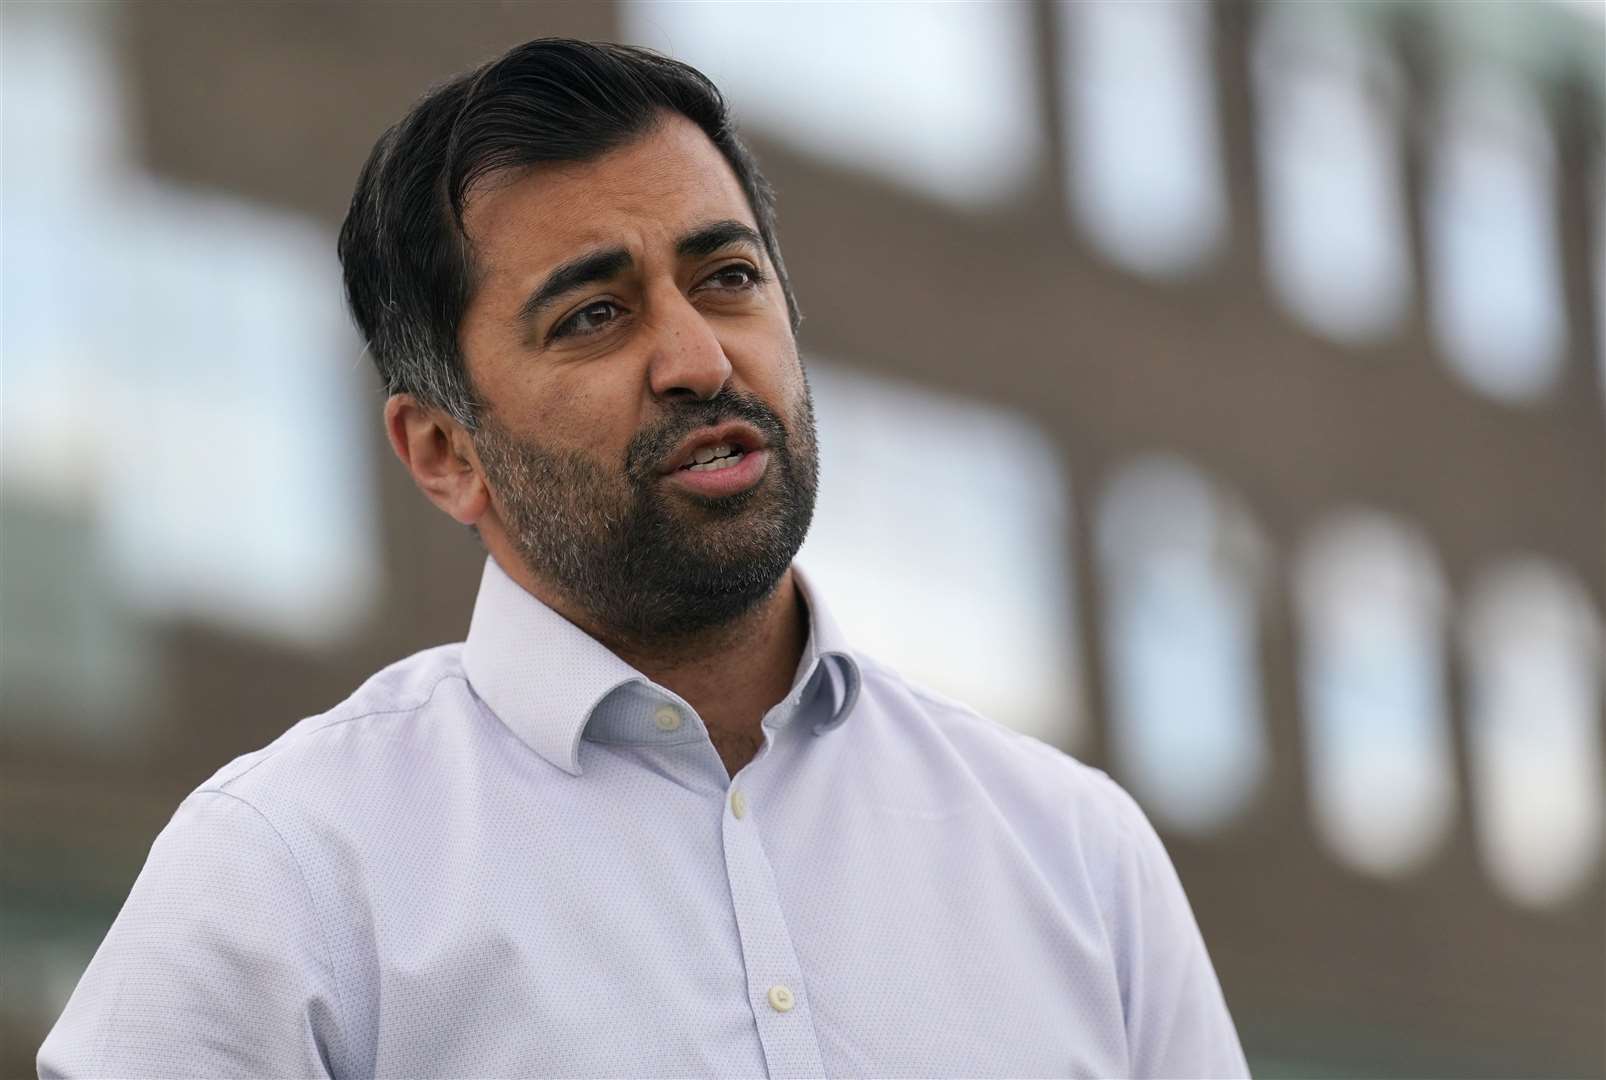 Health Secretary Humza Yousaf said it will ‘take time’ for him to build up a rapport with the new UK Health Secretary (PA)